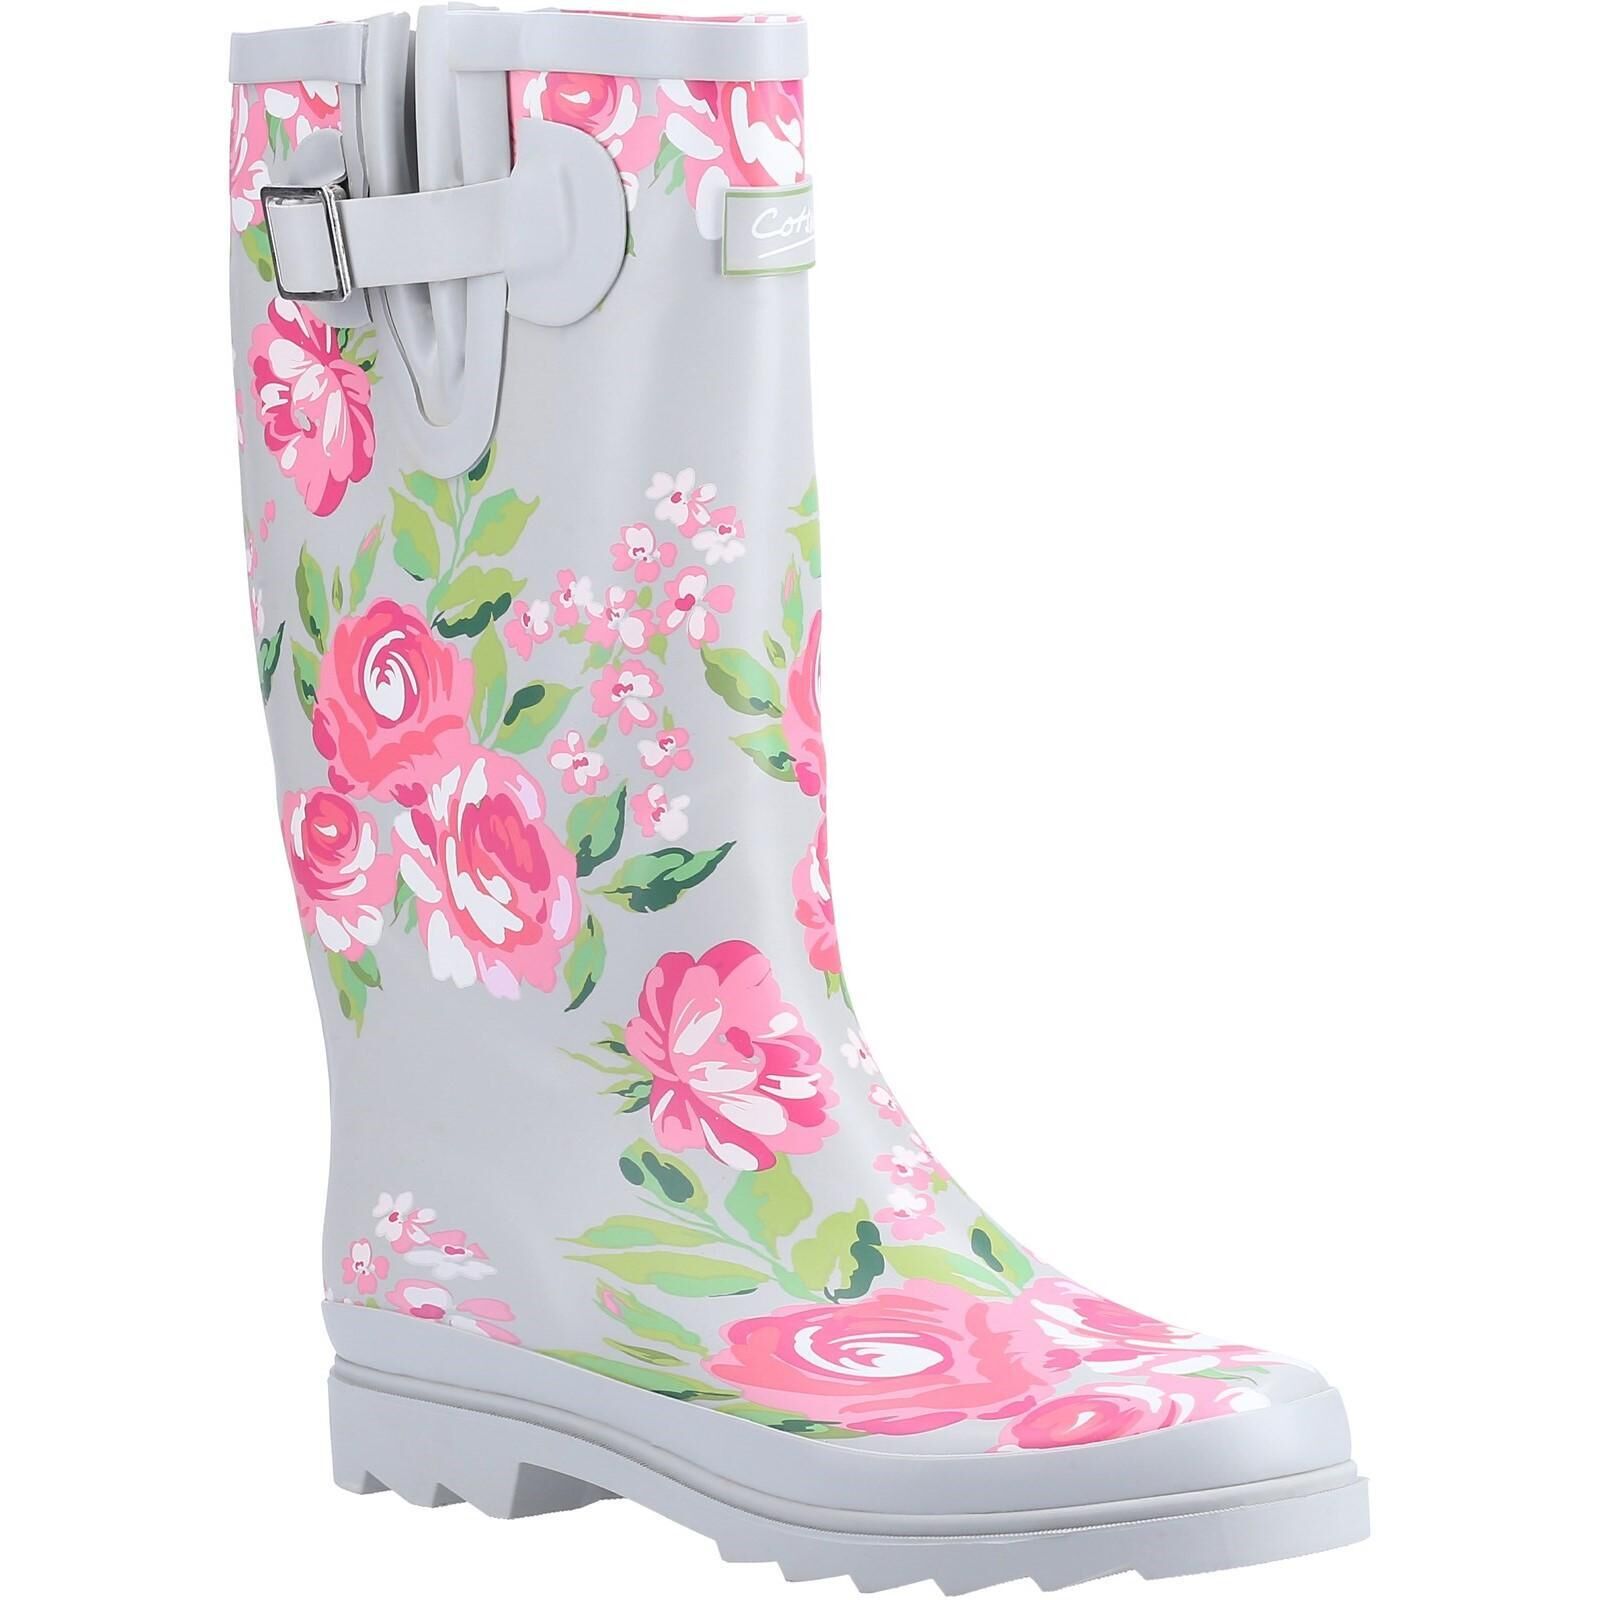 COTSWOLD Womens/Ladies Blossom Wellington Boots (Grey/Pink)